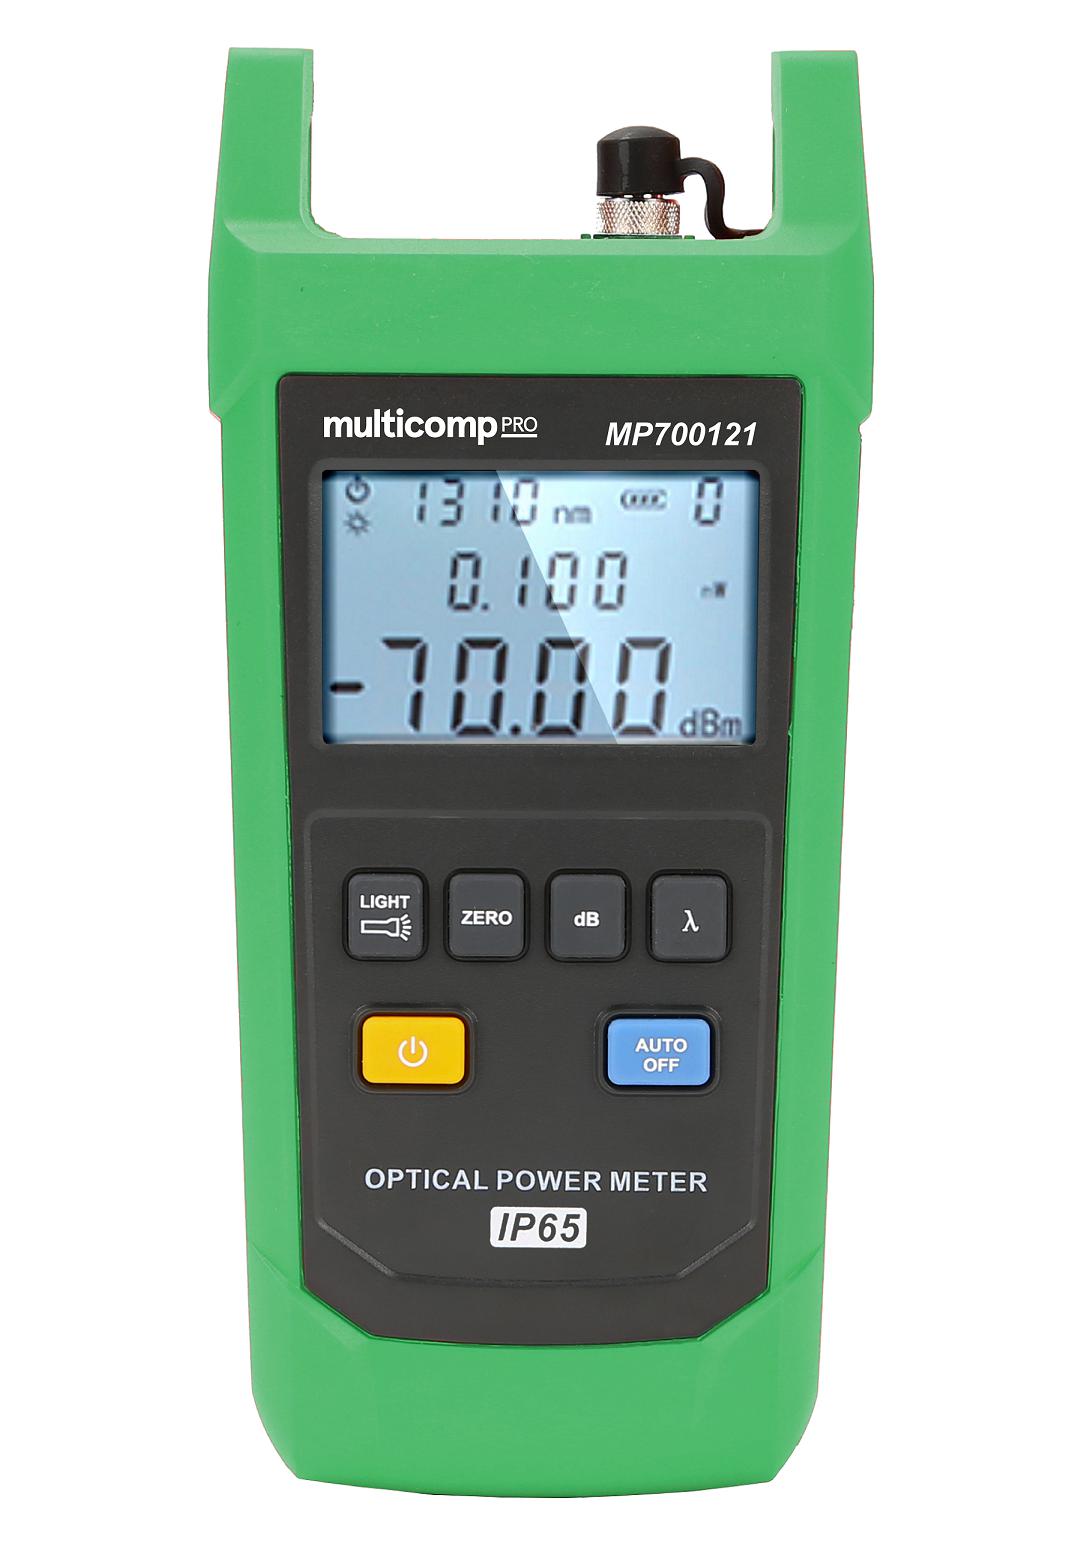 MP700121 OPTICAL POWER METER, HH, -70 TO 10DBM MULTICOMP PRO